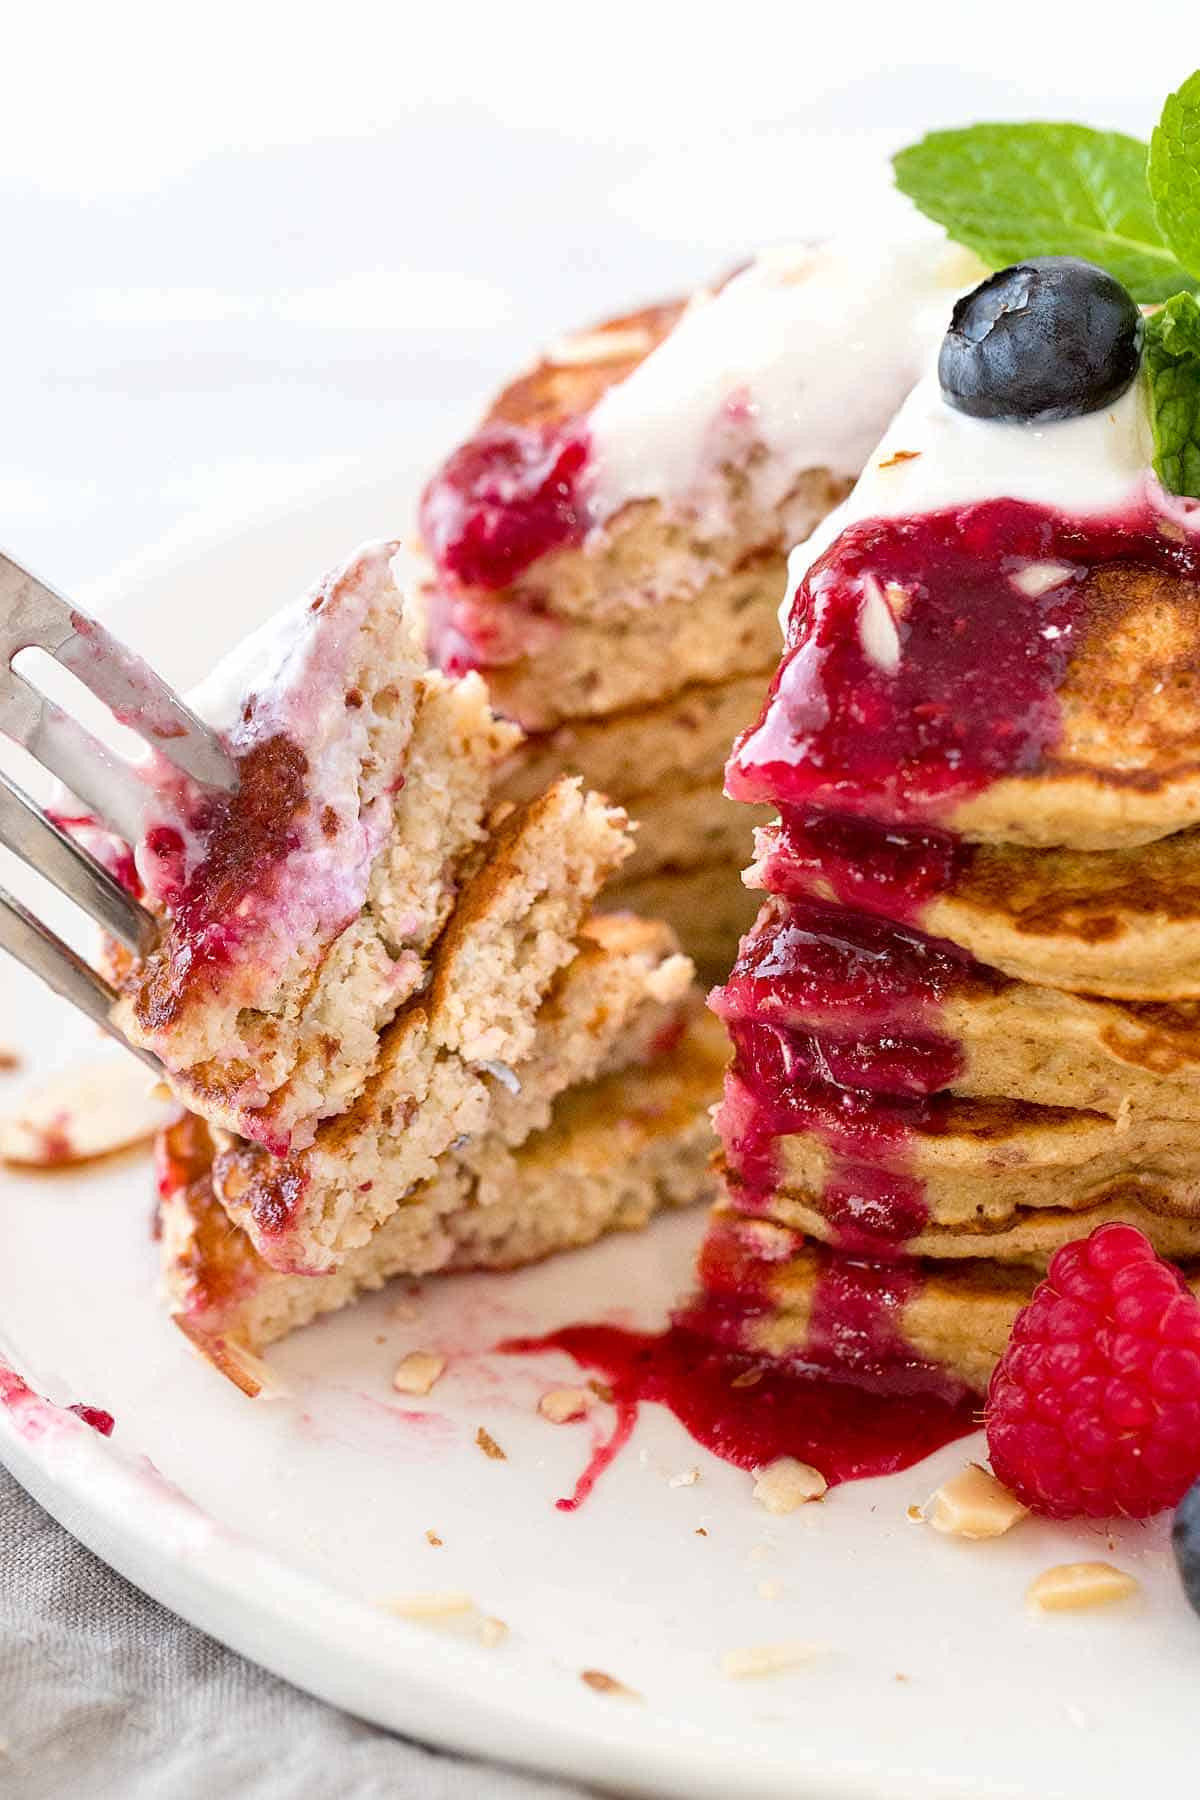 Oatmeal Pancakes Healthy
 Healthy Oat Pancakes with Berry Sauce